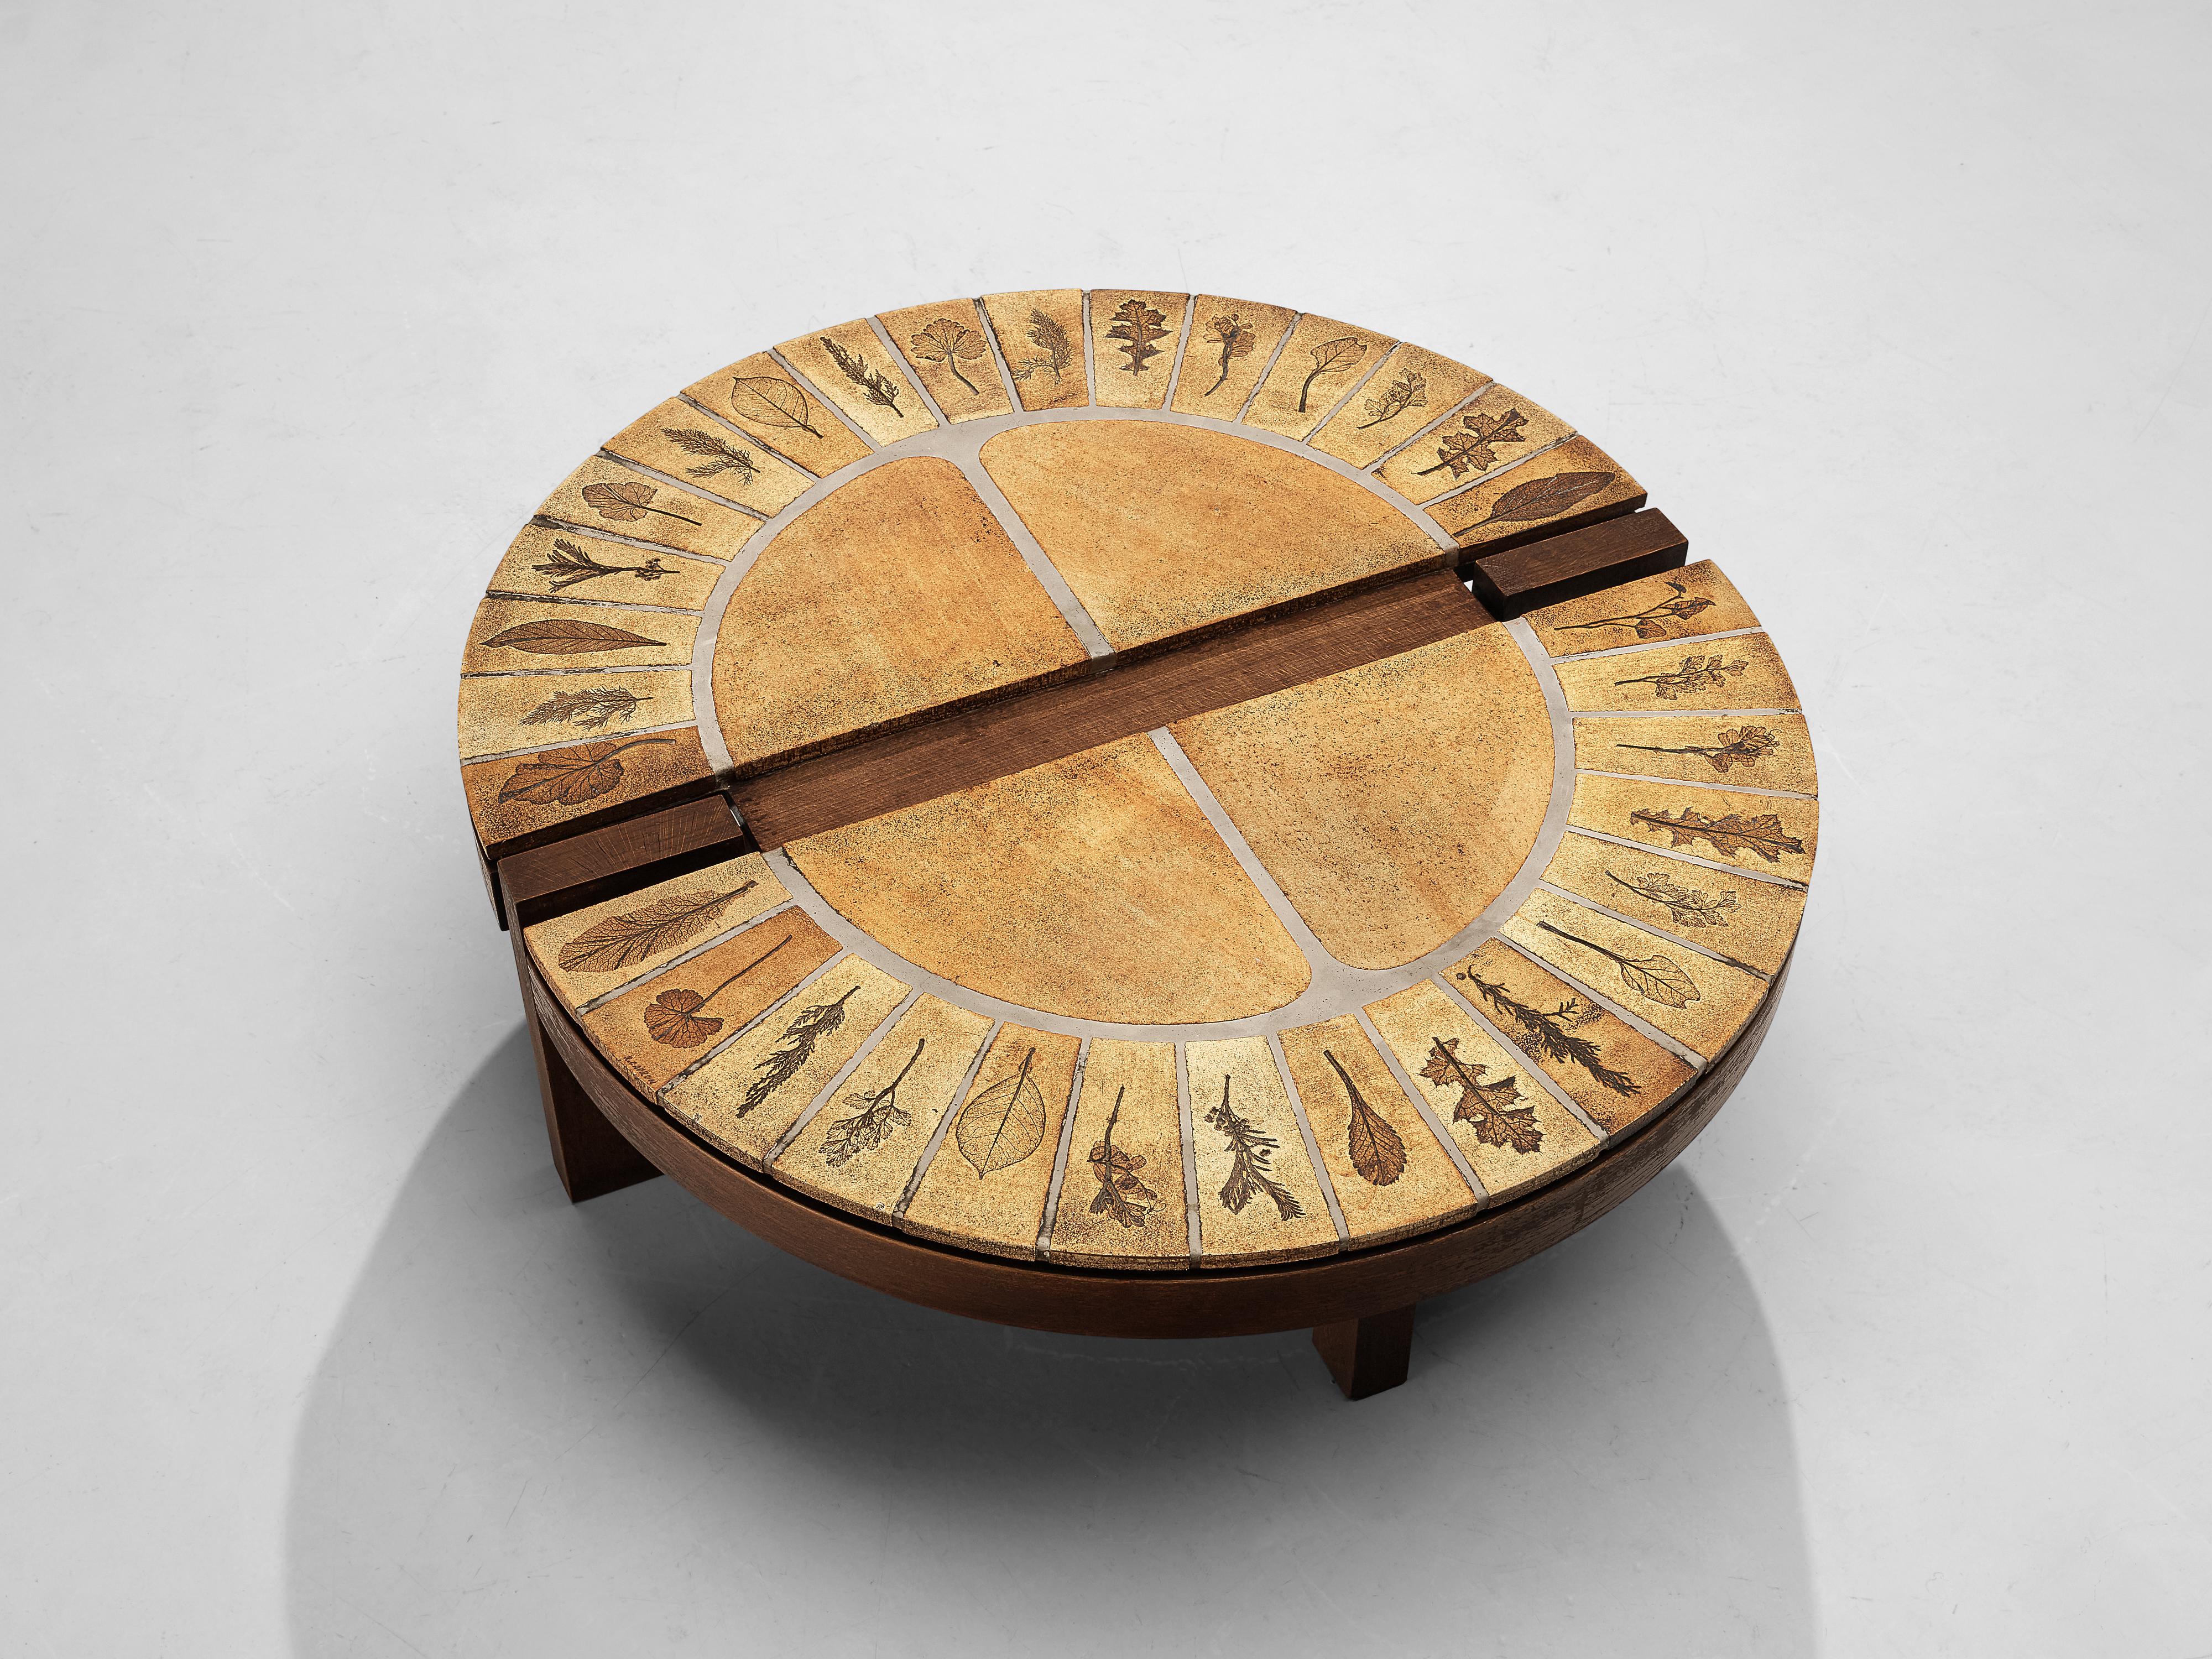 Roger Capron, coffee table, wood, ceramic tiles, France, 1960s

Beautiful and detailed round coffee table with delicate details on the ceramic top. The table comes from the 'Garrigue' series and has an elegant designed top that is equipped with